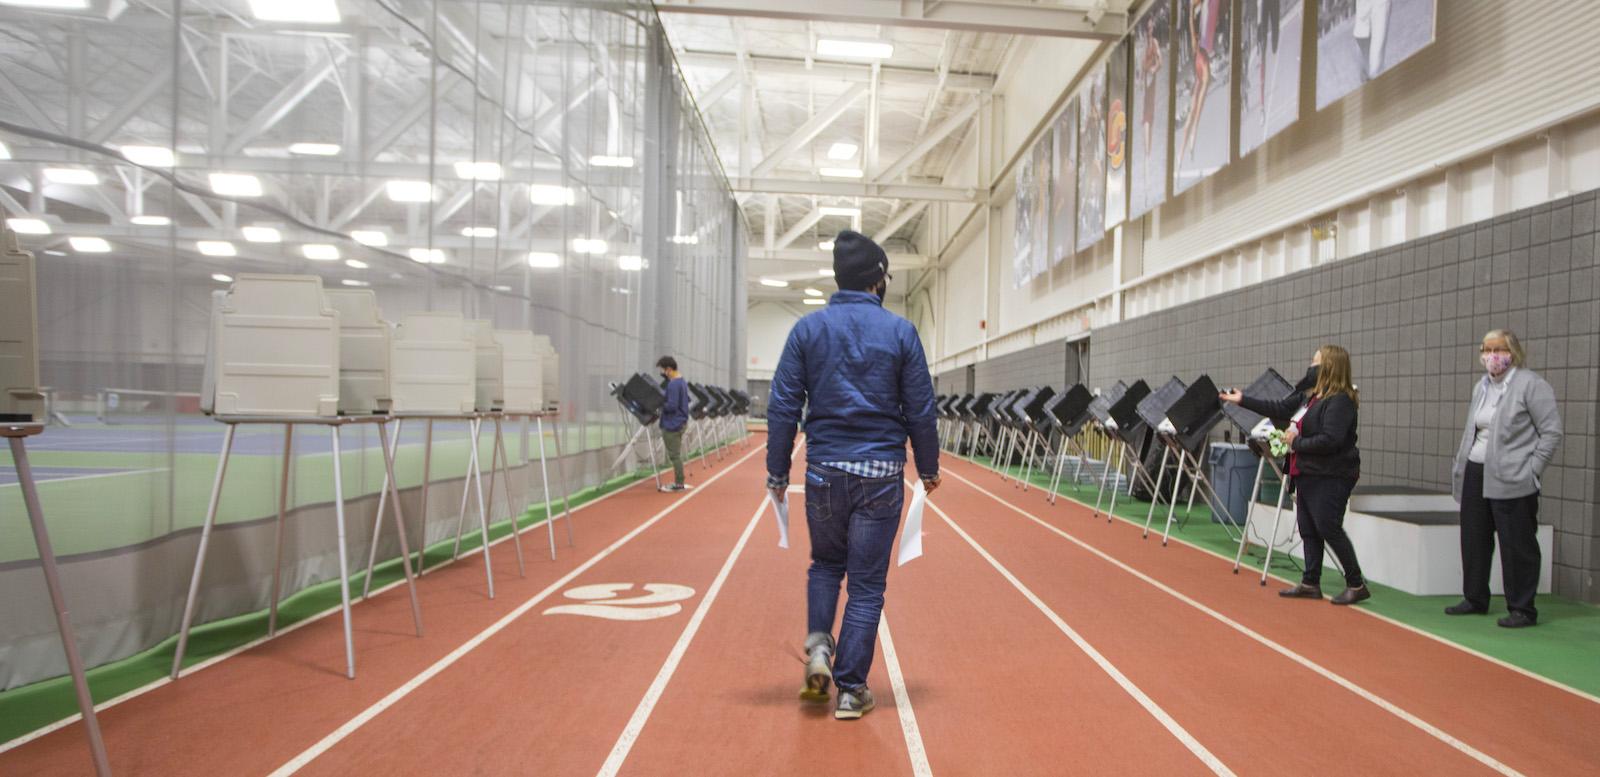 A student wearing a protective mask walks on an indoor track toward a voting booth.